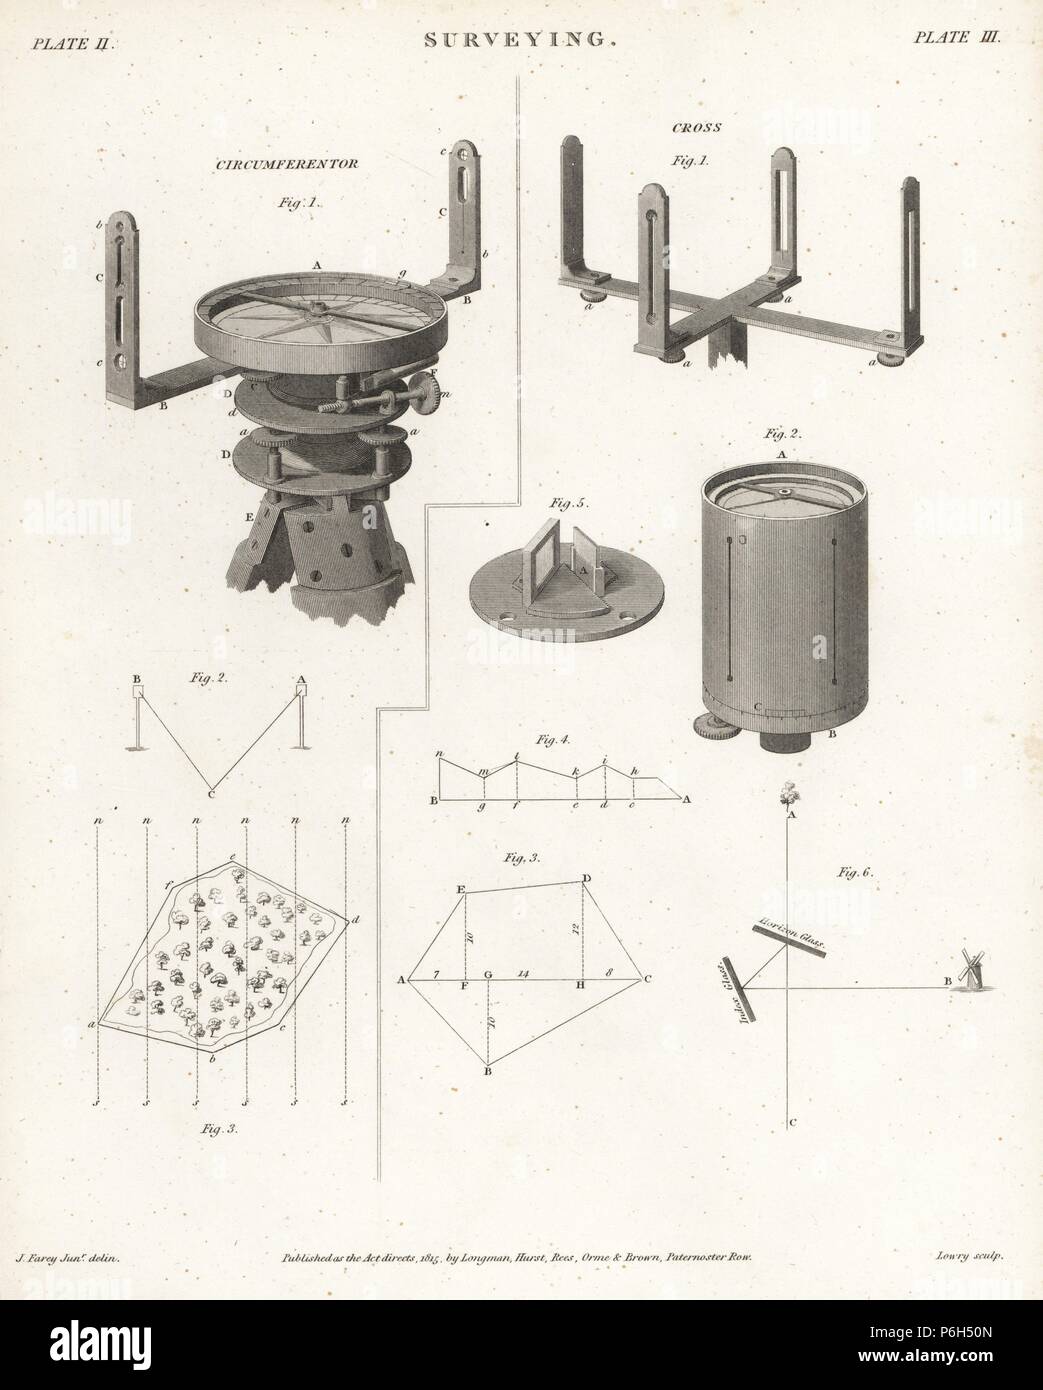 Surveying equipment from the 19th century: circumferentor and cross, horizon glass and index glass. Copperplate engraving by Wilson Lowry after an Illustration by J. Farey from Abraham Rees' 'Cyclopedia or Universal Dictionary,' London, 1815. Stock Photo